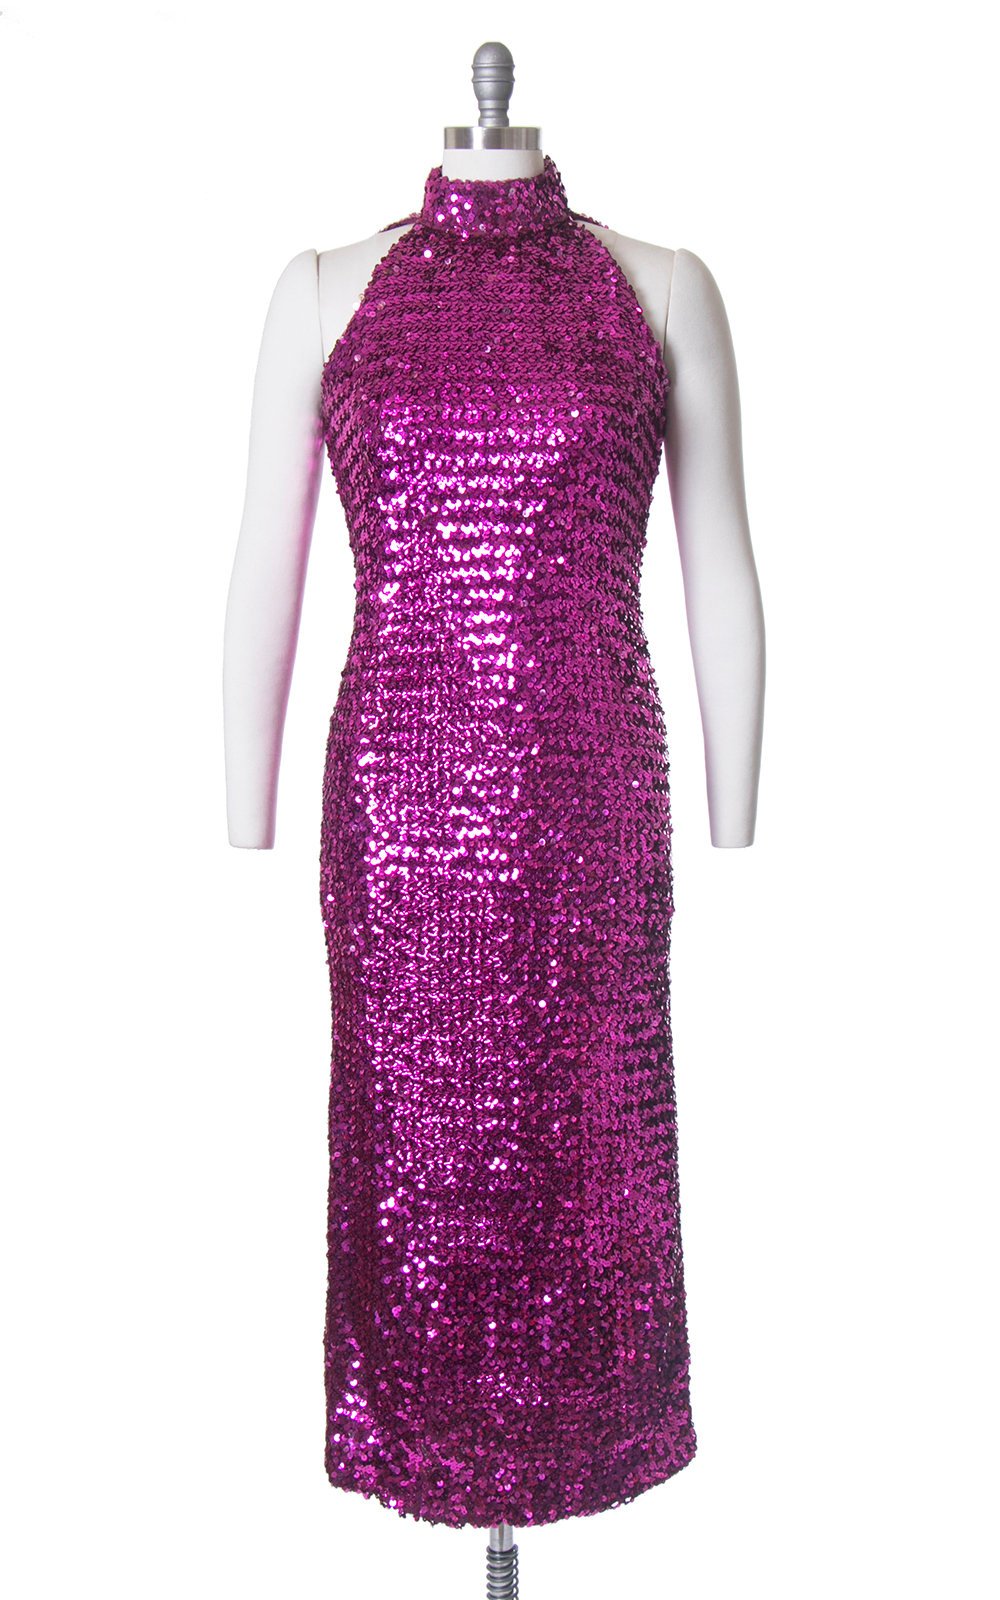 Vintage 1980s Dress | 80s Sequin Sparkly Purple Pink Halter Open Back Full Length Burlesque Holiday Party Dress (small/medium)